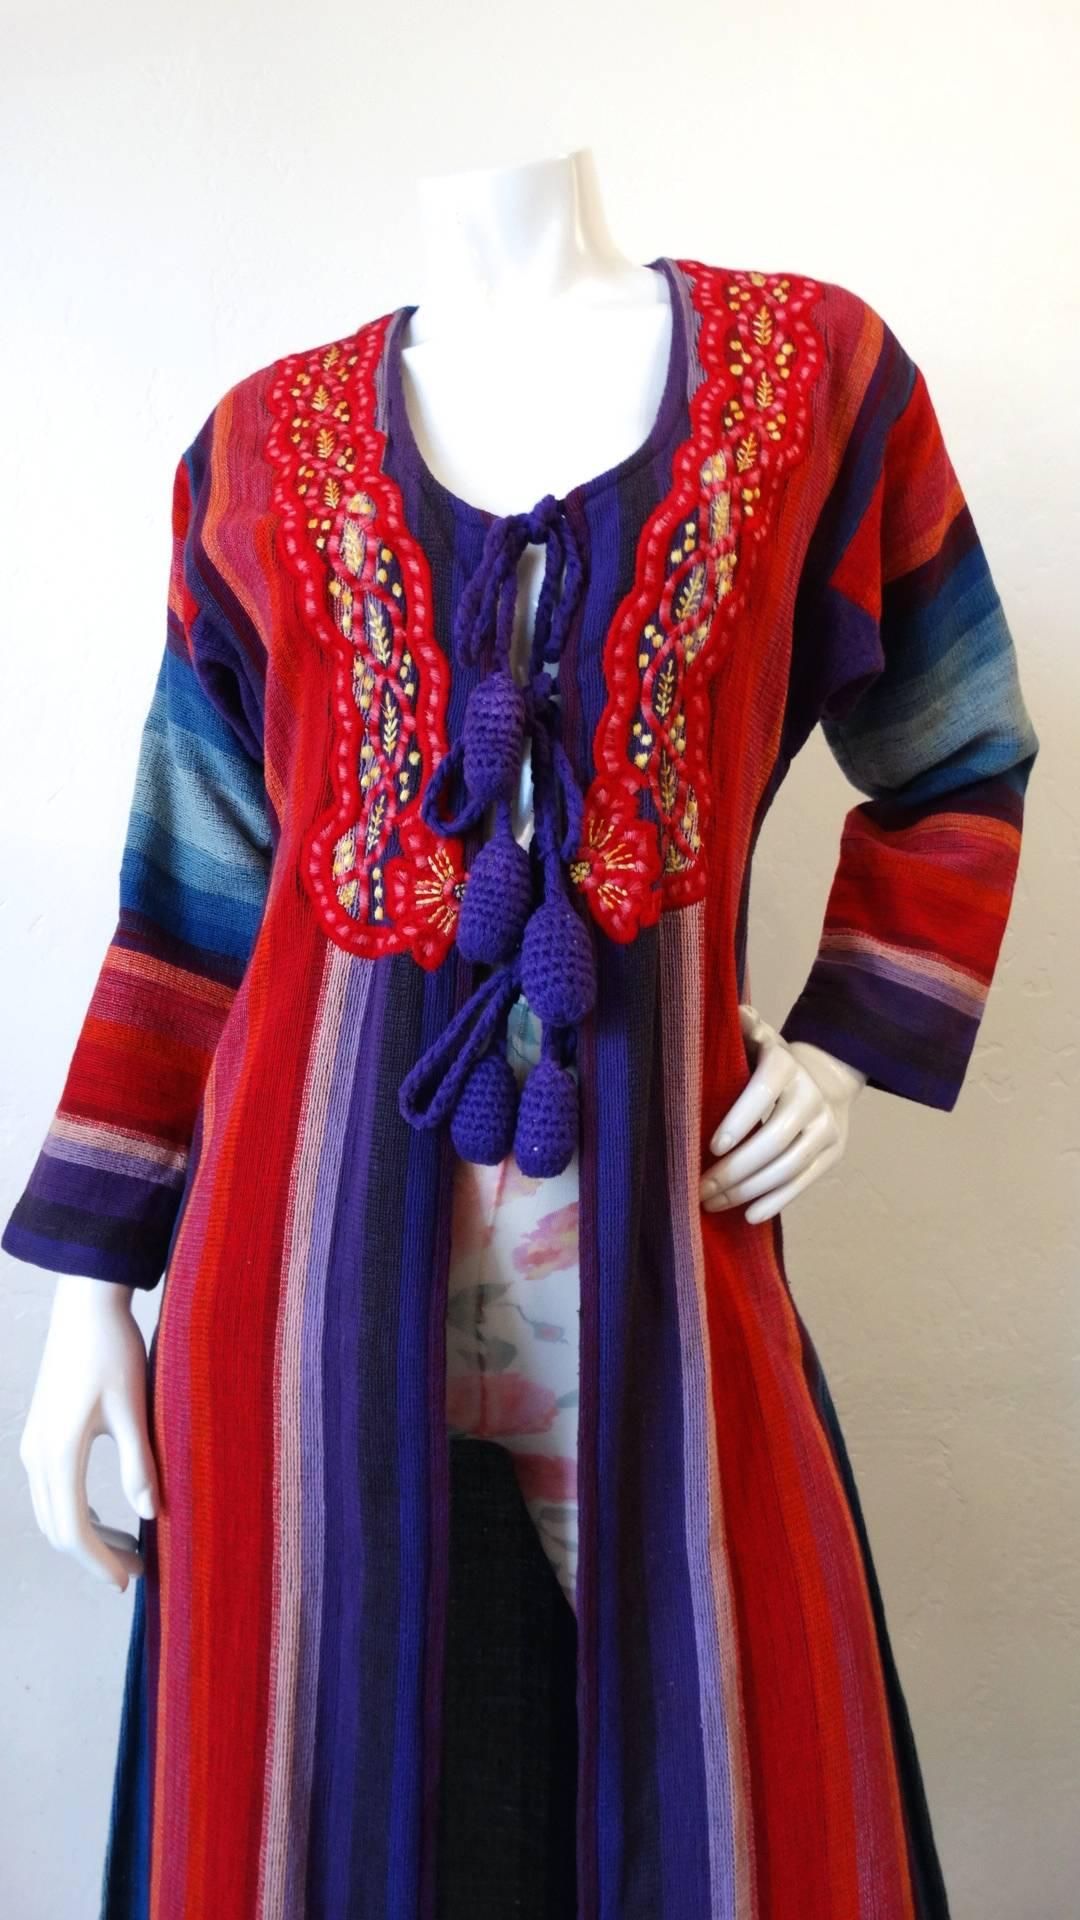 We're obsessed with Israeli designer Rikma- and you will be too with this amazing 1970s striped duster jacket! Made of a thick woven cotton in Rikma's signature striped pattern, in shades of red, purple and blue. Red scalloped embroidery all along